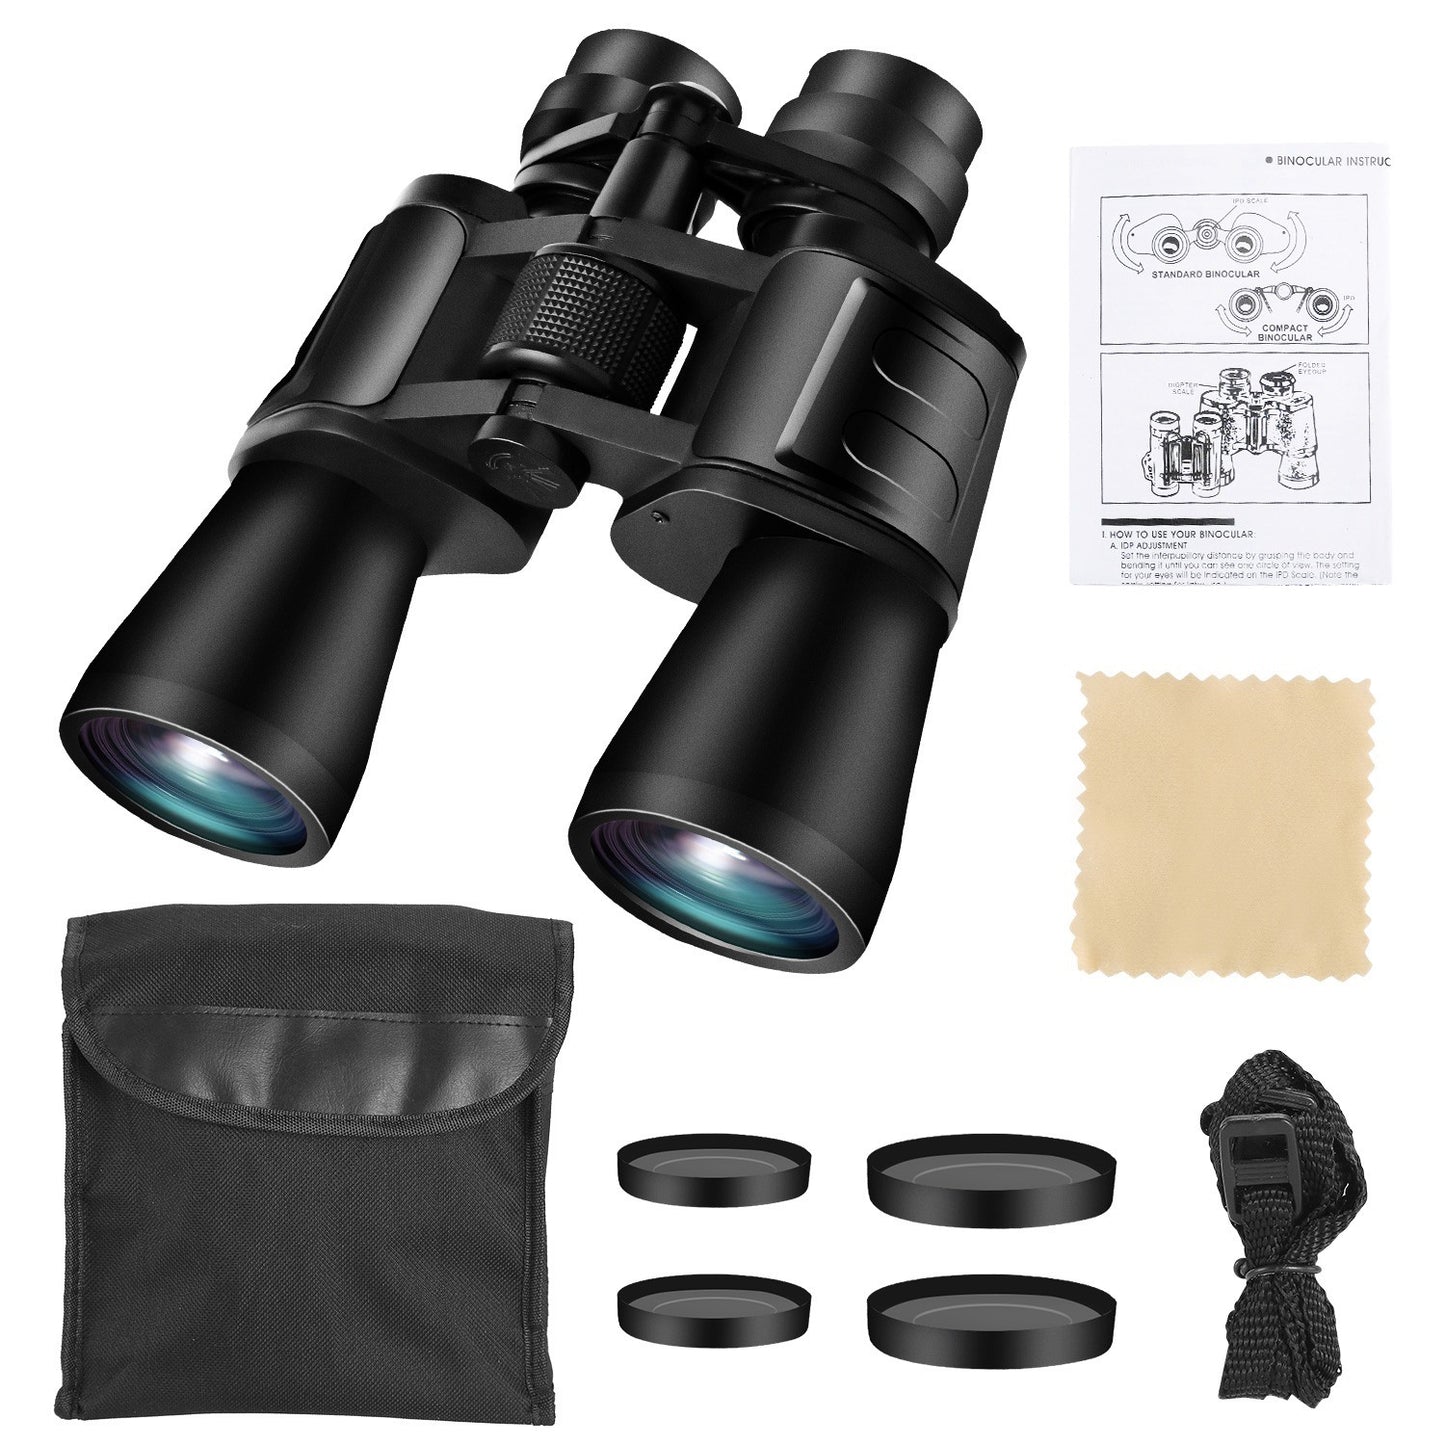 Portable Zoom Binoculars with FMC Lens Low Light Night Vision for Bird Watching Hunting Sports